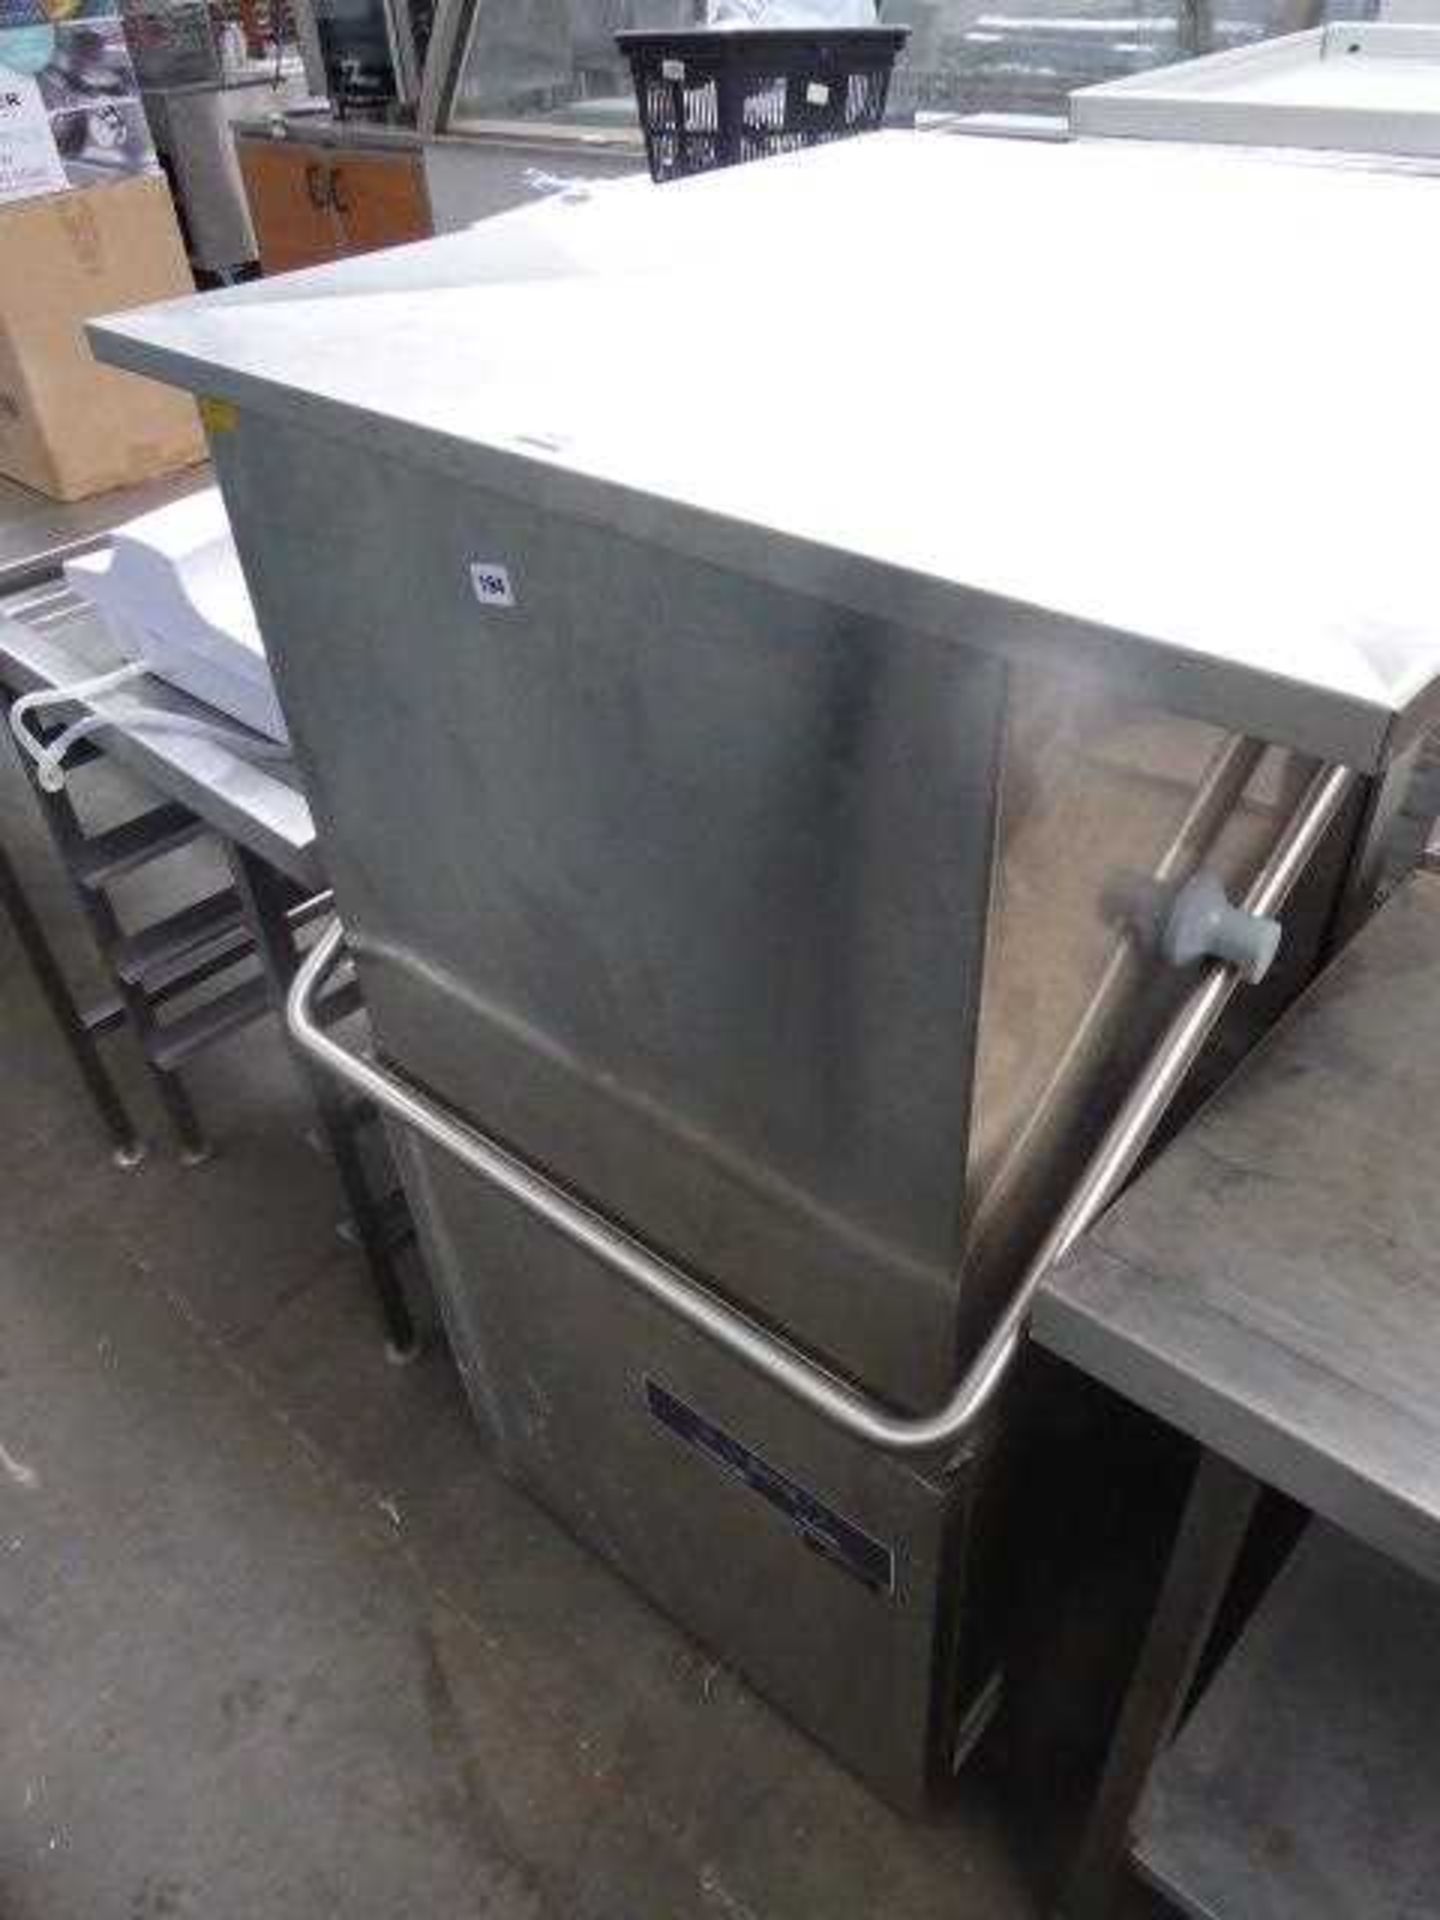 62cm Maidaid C1035WS lift top pass through dish washer with associated draining board and sink